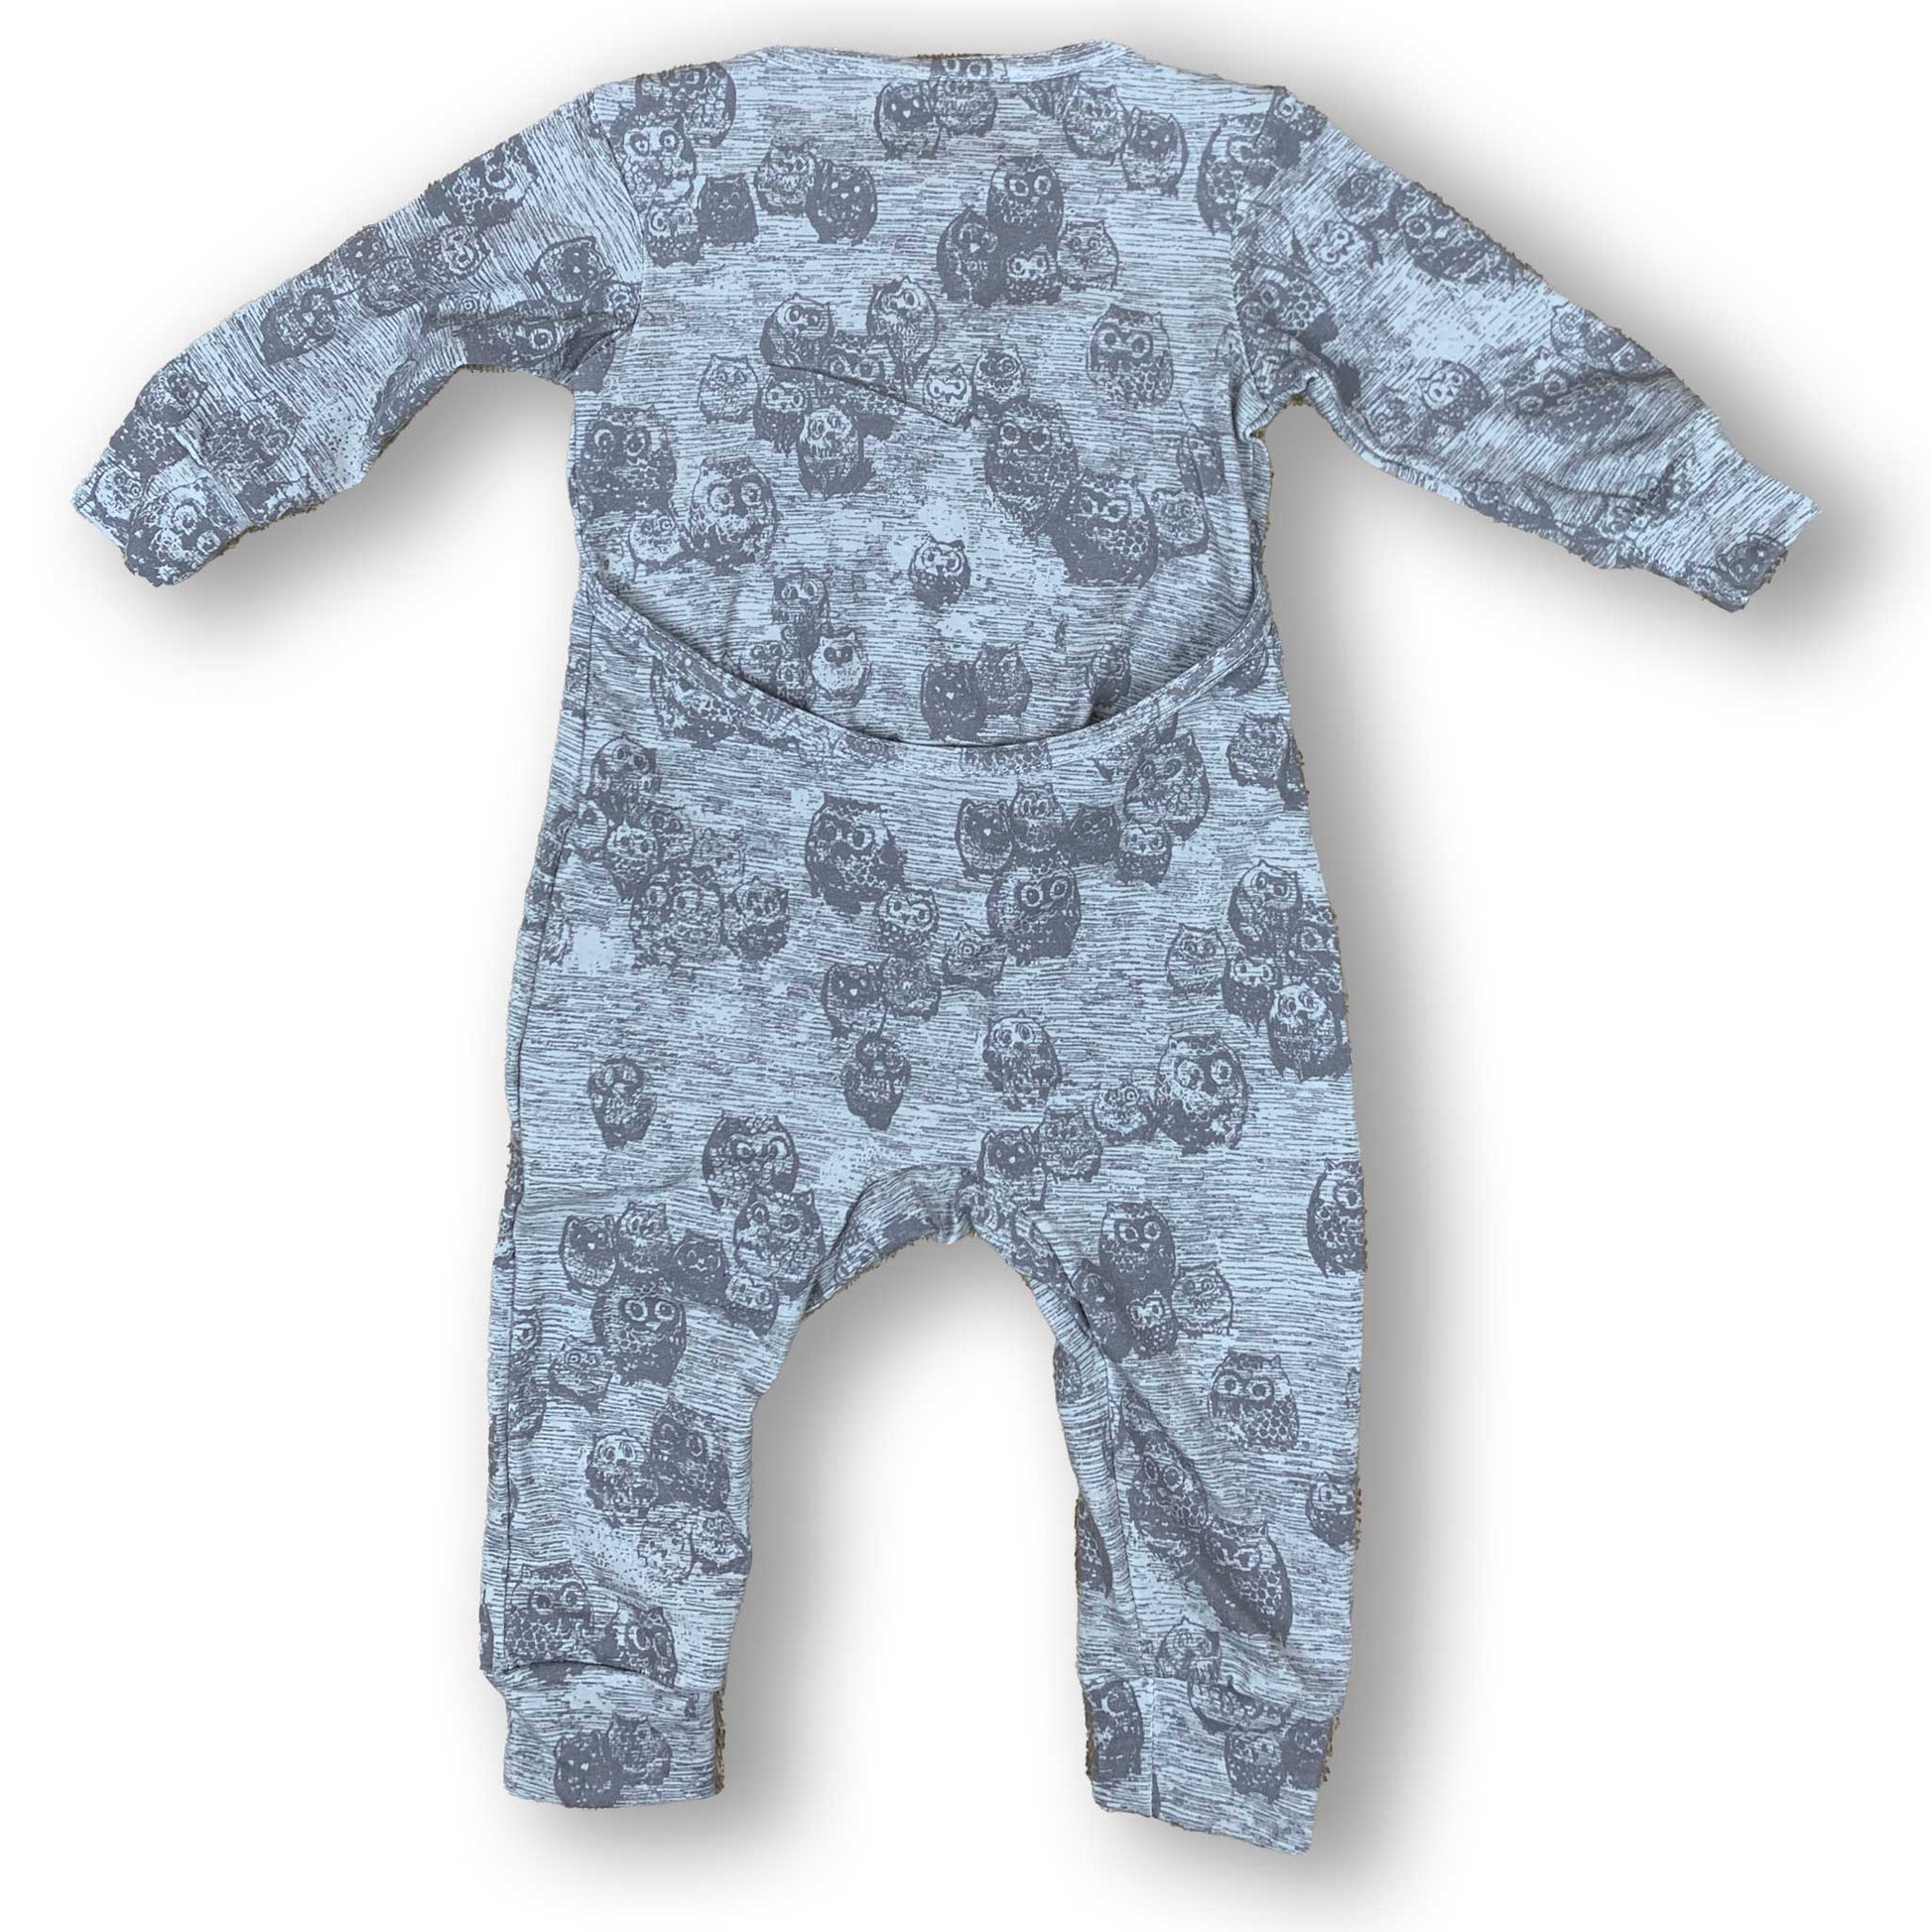 Mod Union™ Infant Long Sleeved Baby Union Suit | Various Fun Cotton Knit Prints-Baby One-Pieces-0-3 months-Blueberry Plaid-Hagsters